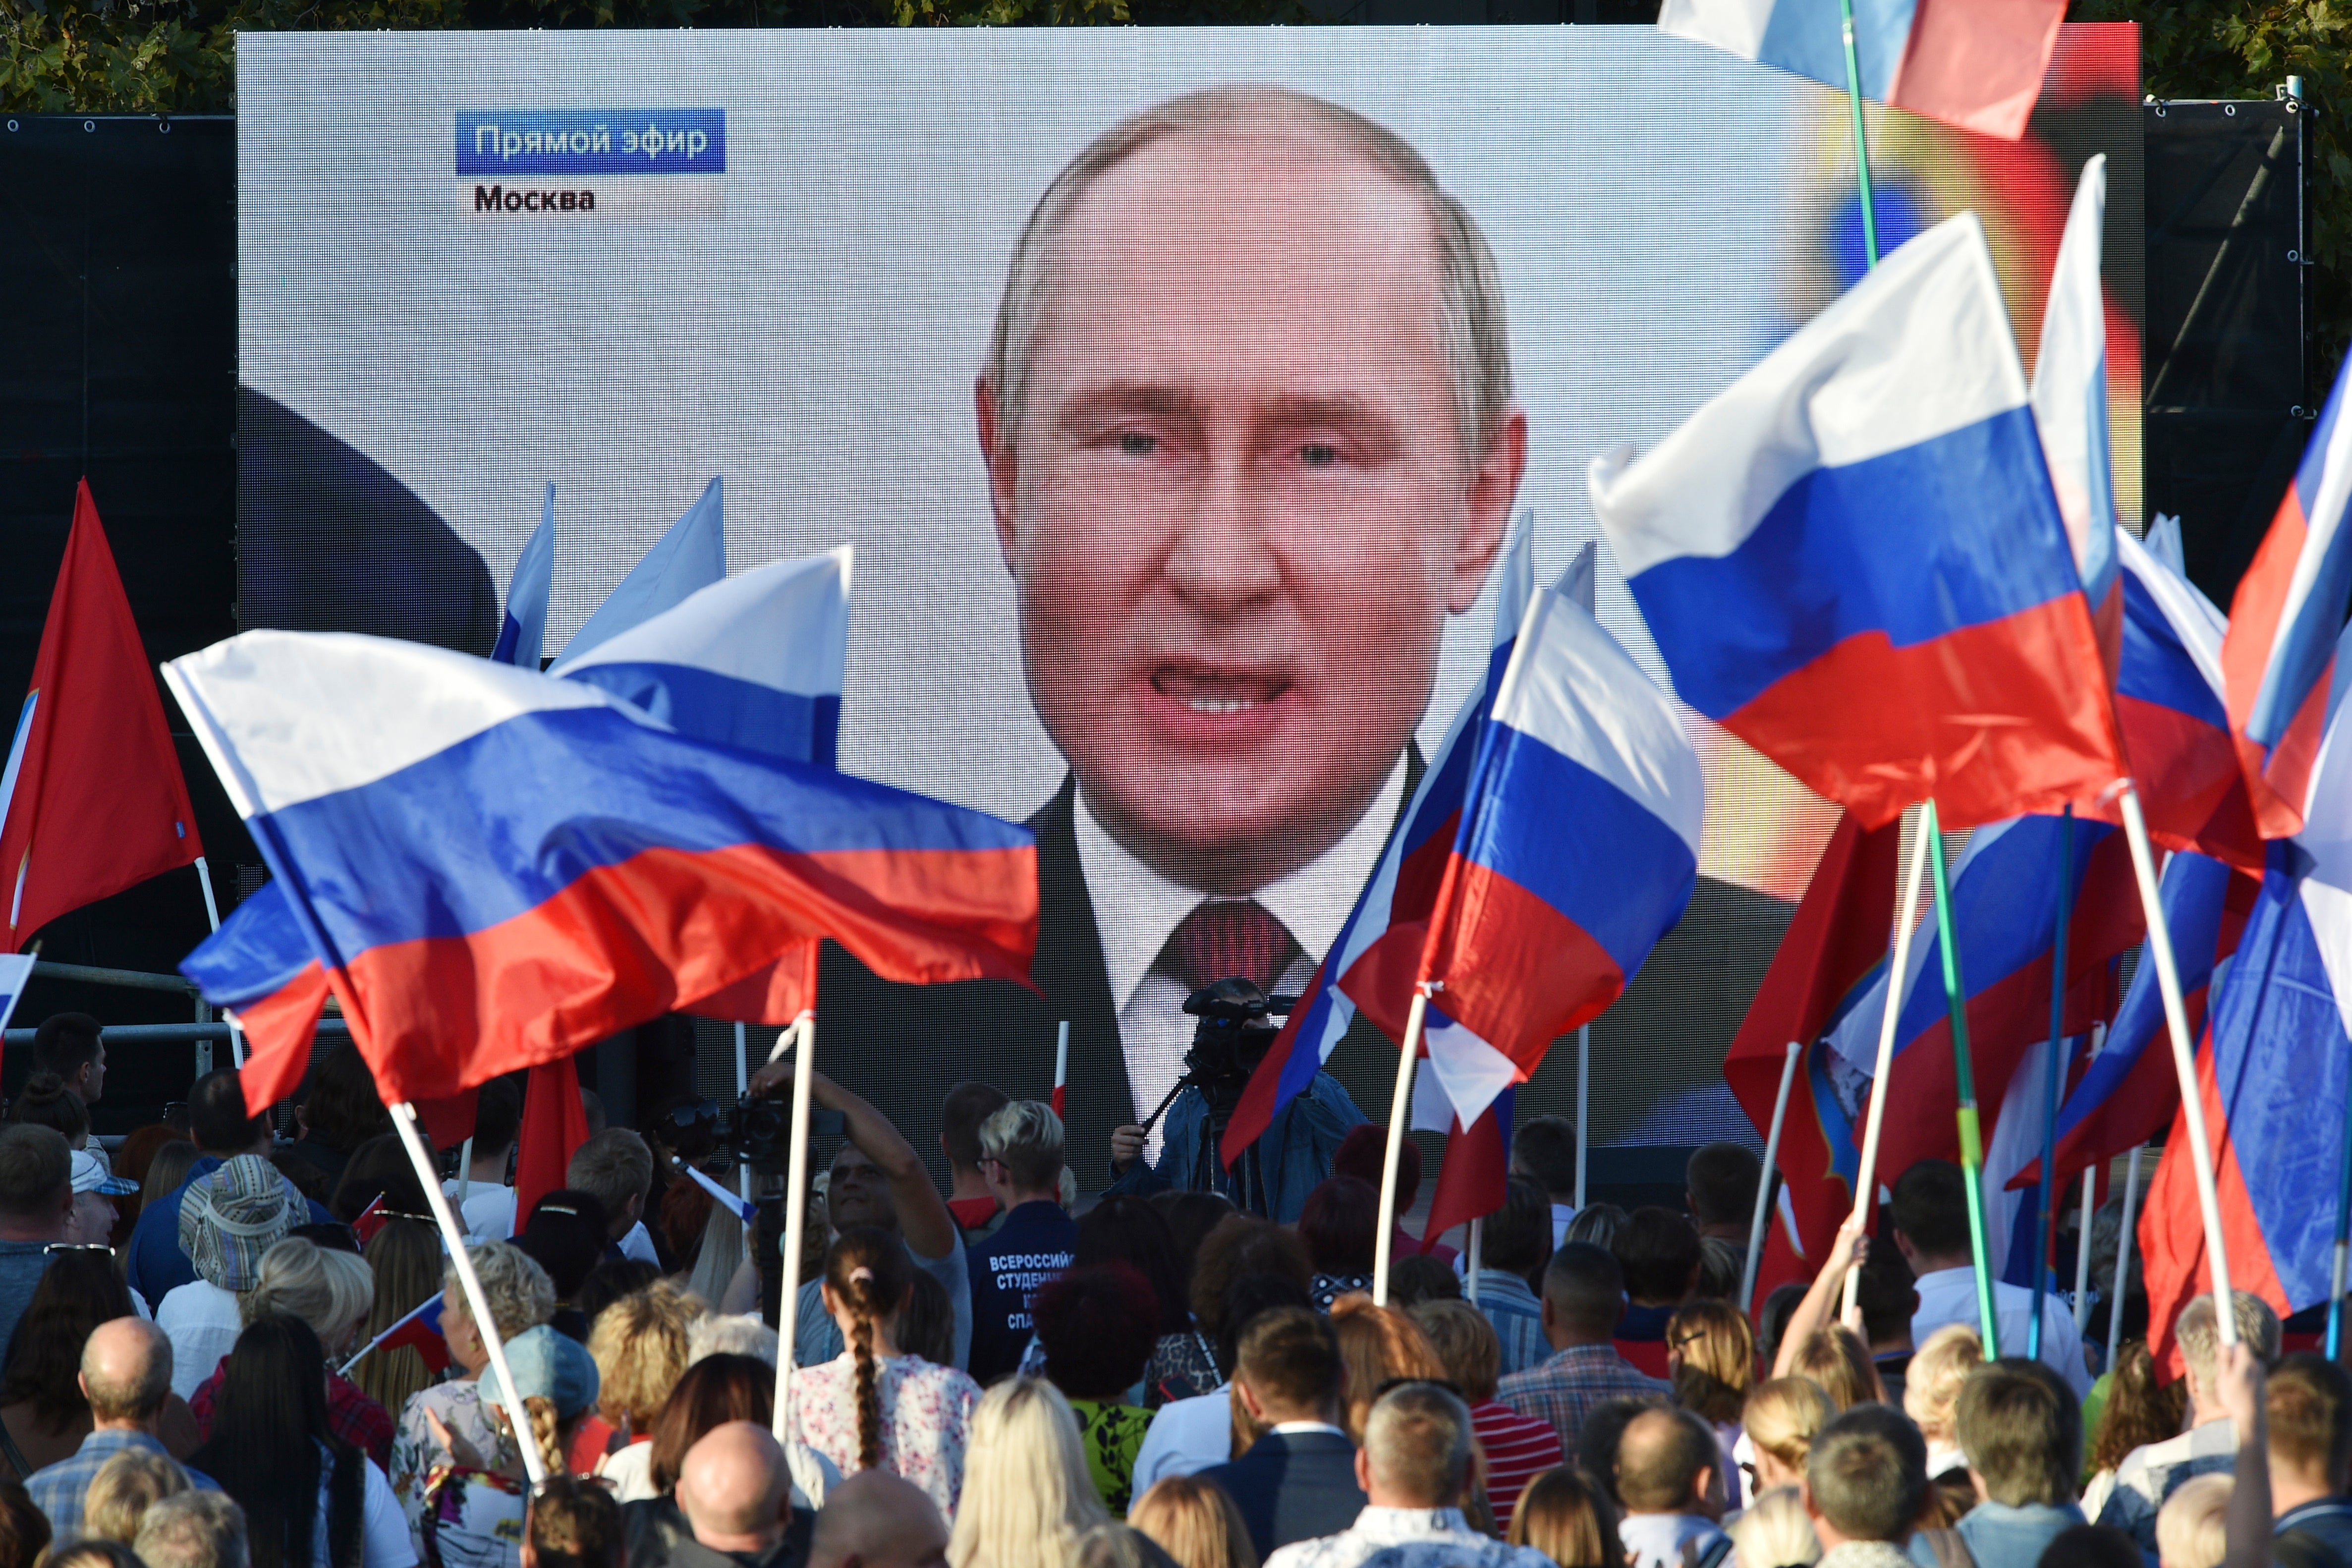 Crowds watch on a large screen as Vladimir Putin declares Russia is annexing four regions of Ukraine